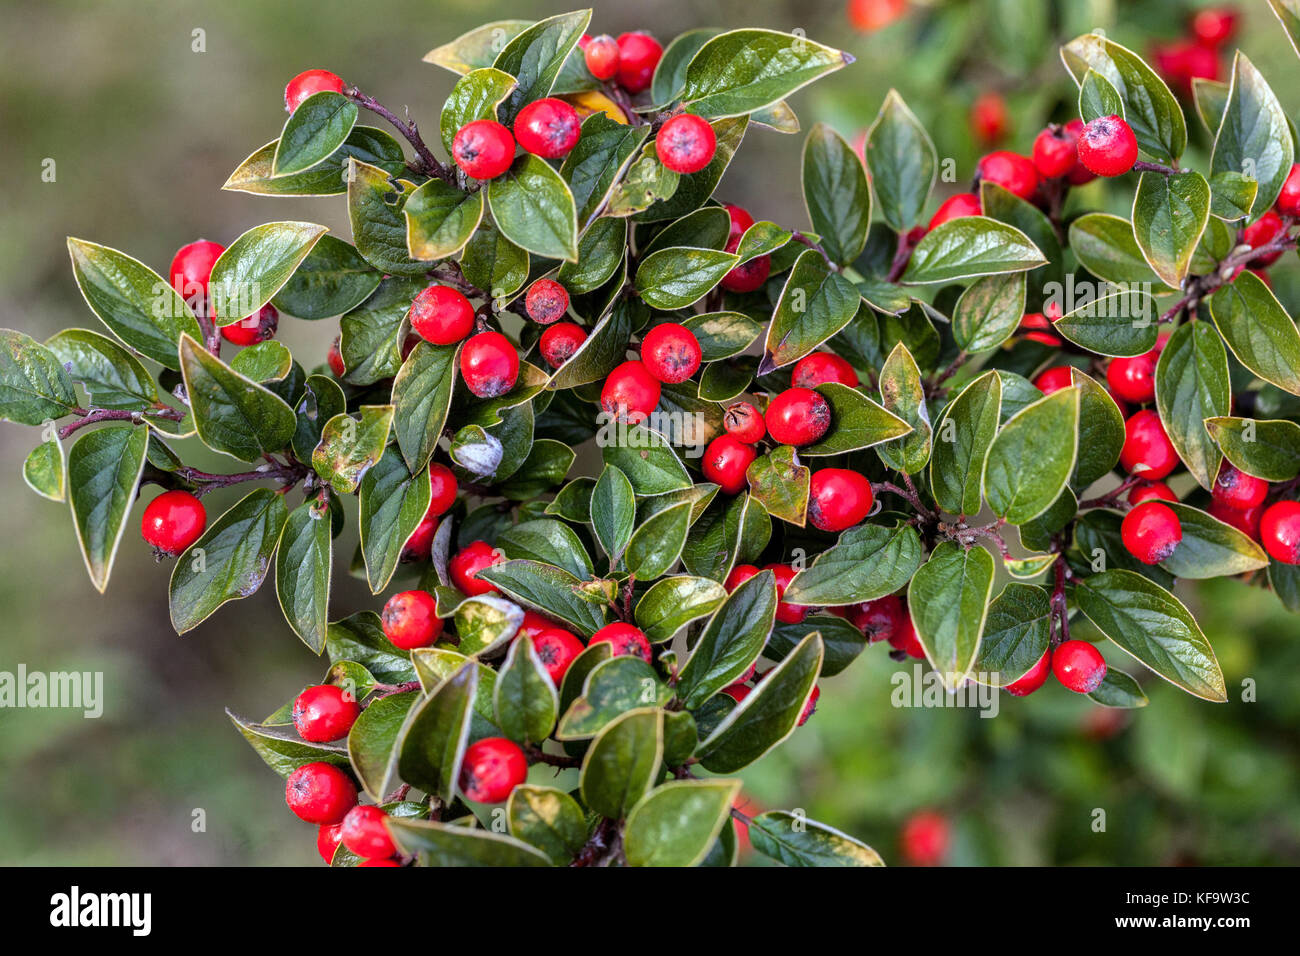 Cotoneaster racemiflorus red berries, fruits on branch, shrub in autumn Cotoneaster berries Stock Photo